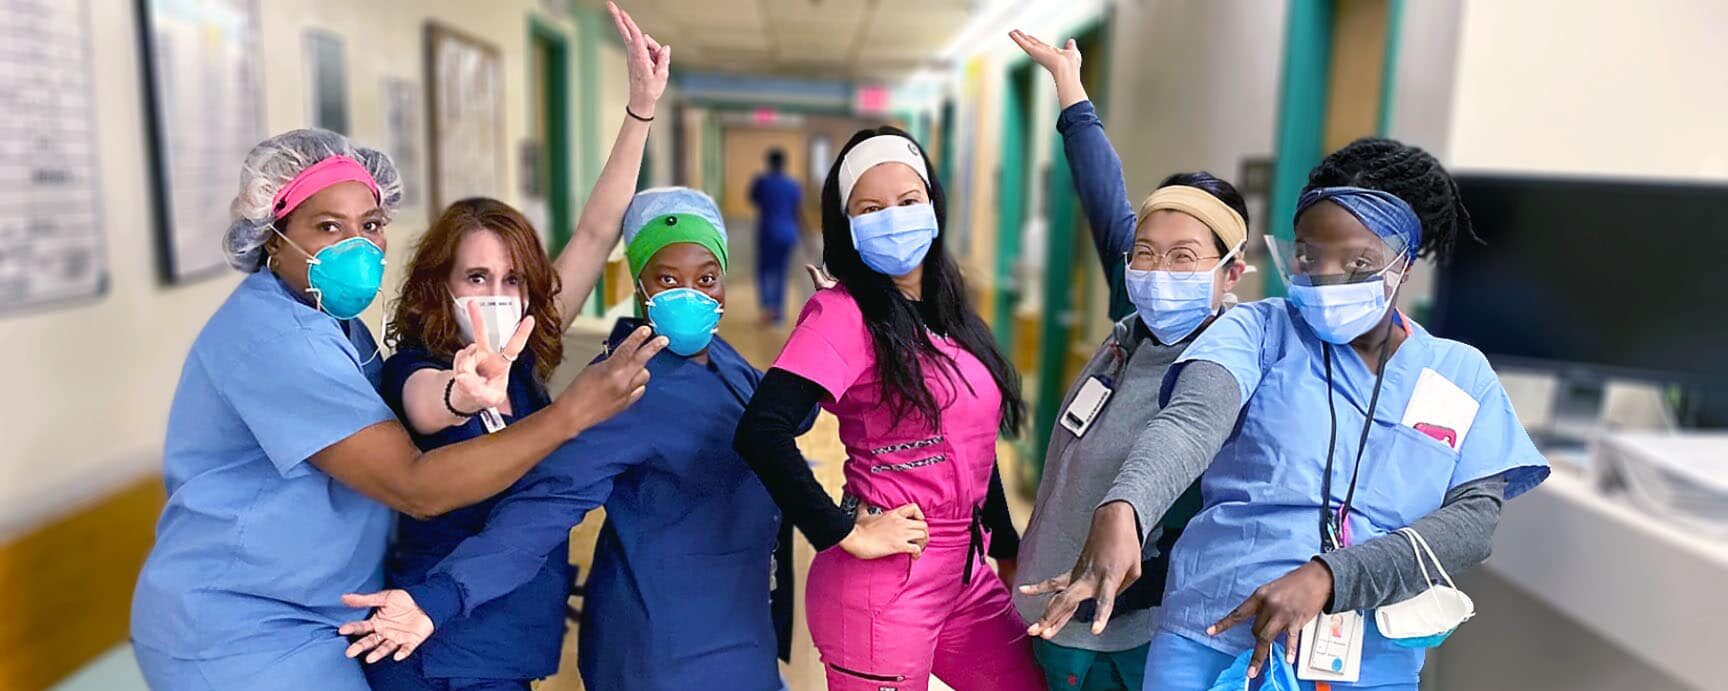 VA Hospital Nurses on the frontline, wearing medical face shields donated by Veterans Rebuilding Life